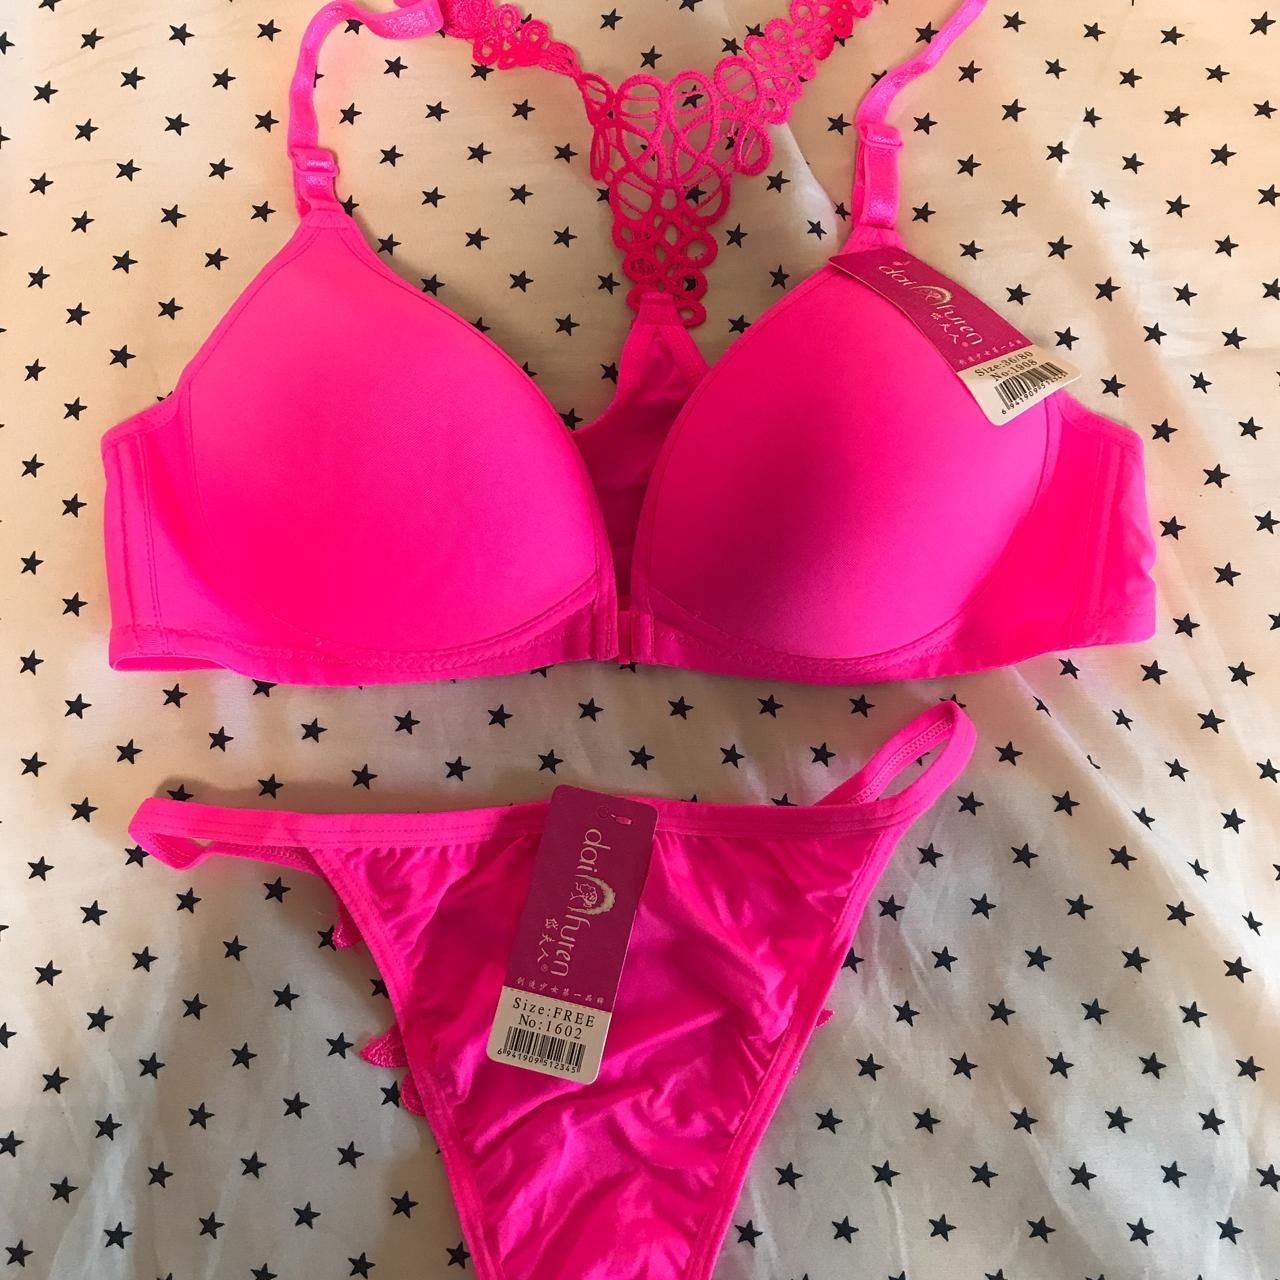 Sexy bright pink bra and panty set! The bra is a